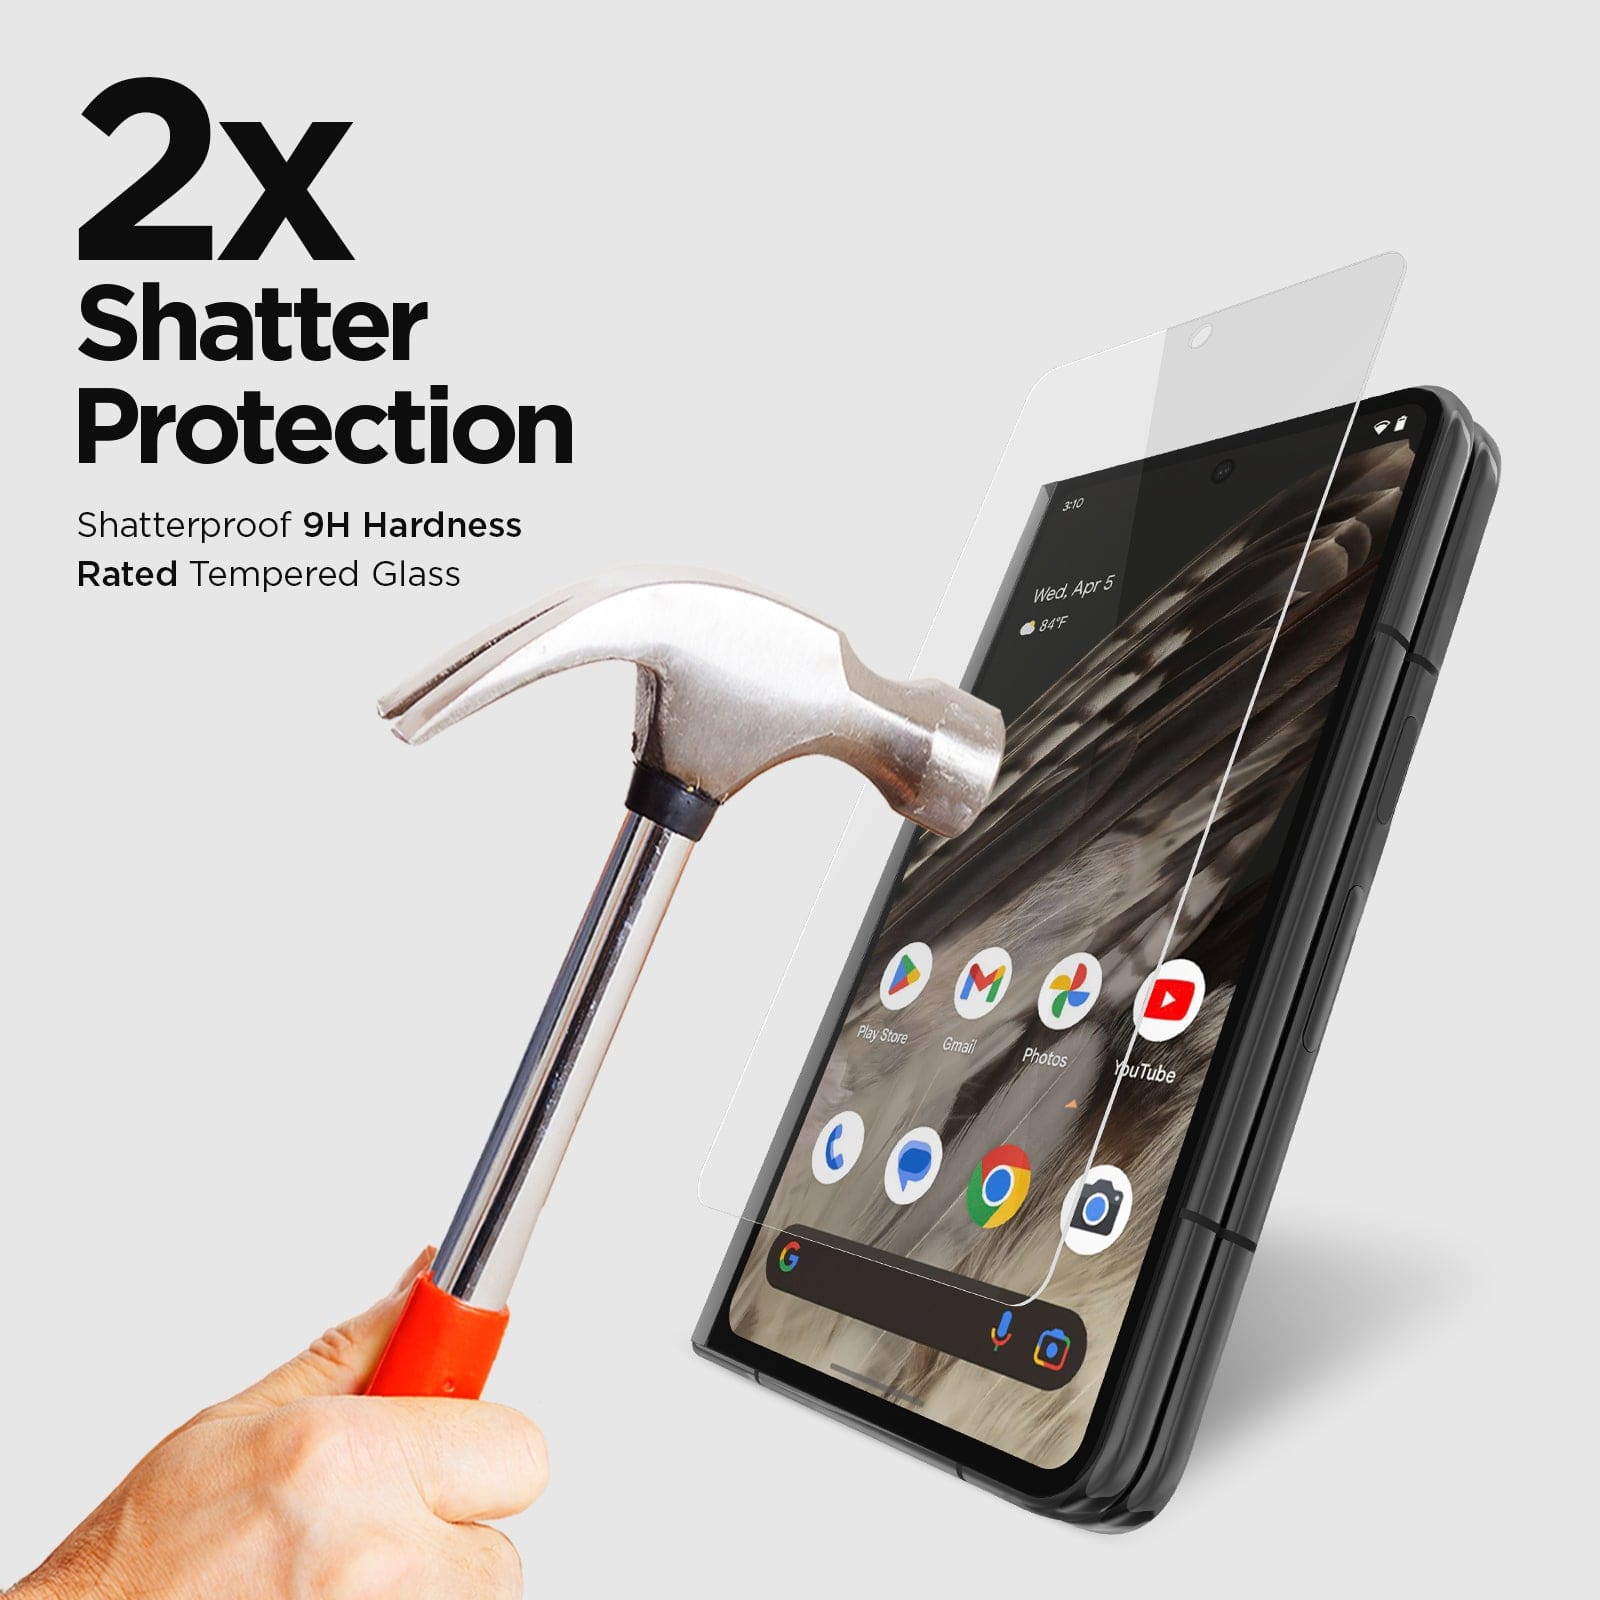 2X SHATTER PROTECTION. SHATTERPROOF 9H HARDNESS RATED TEMPERED GLASS